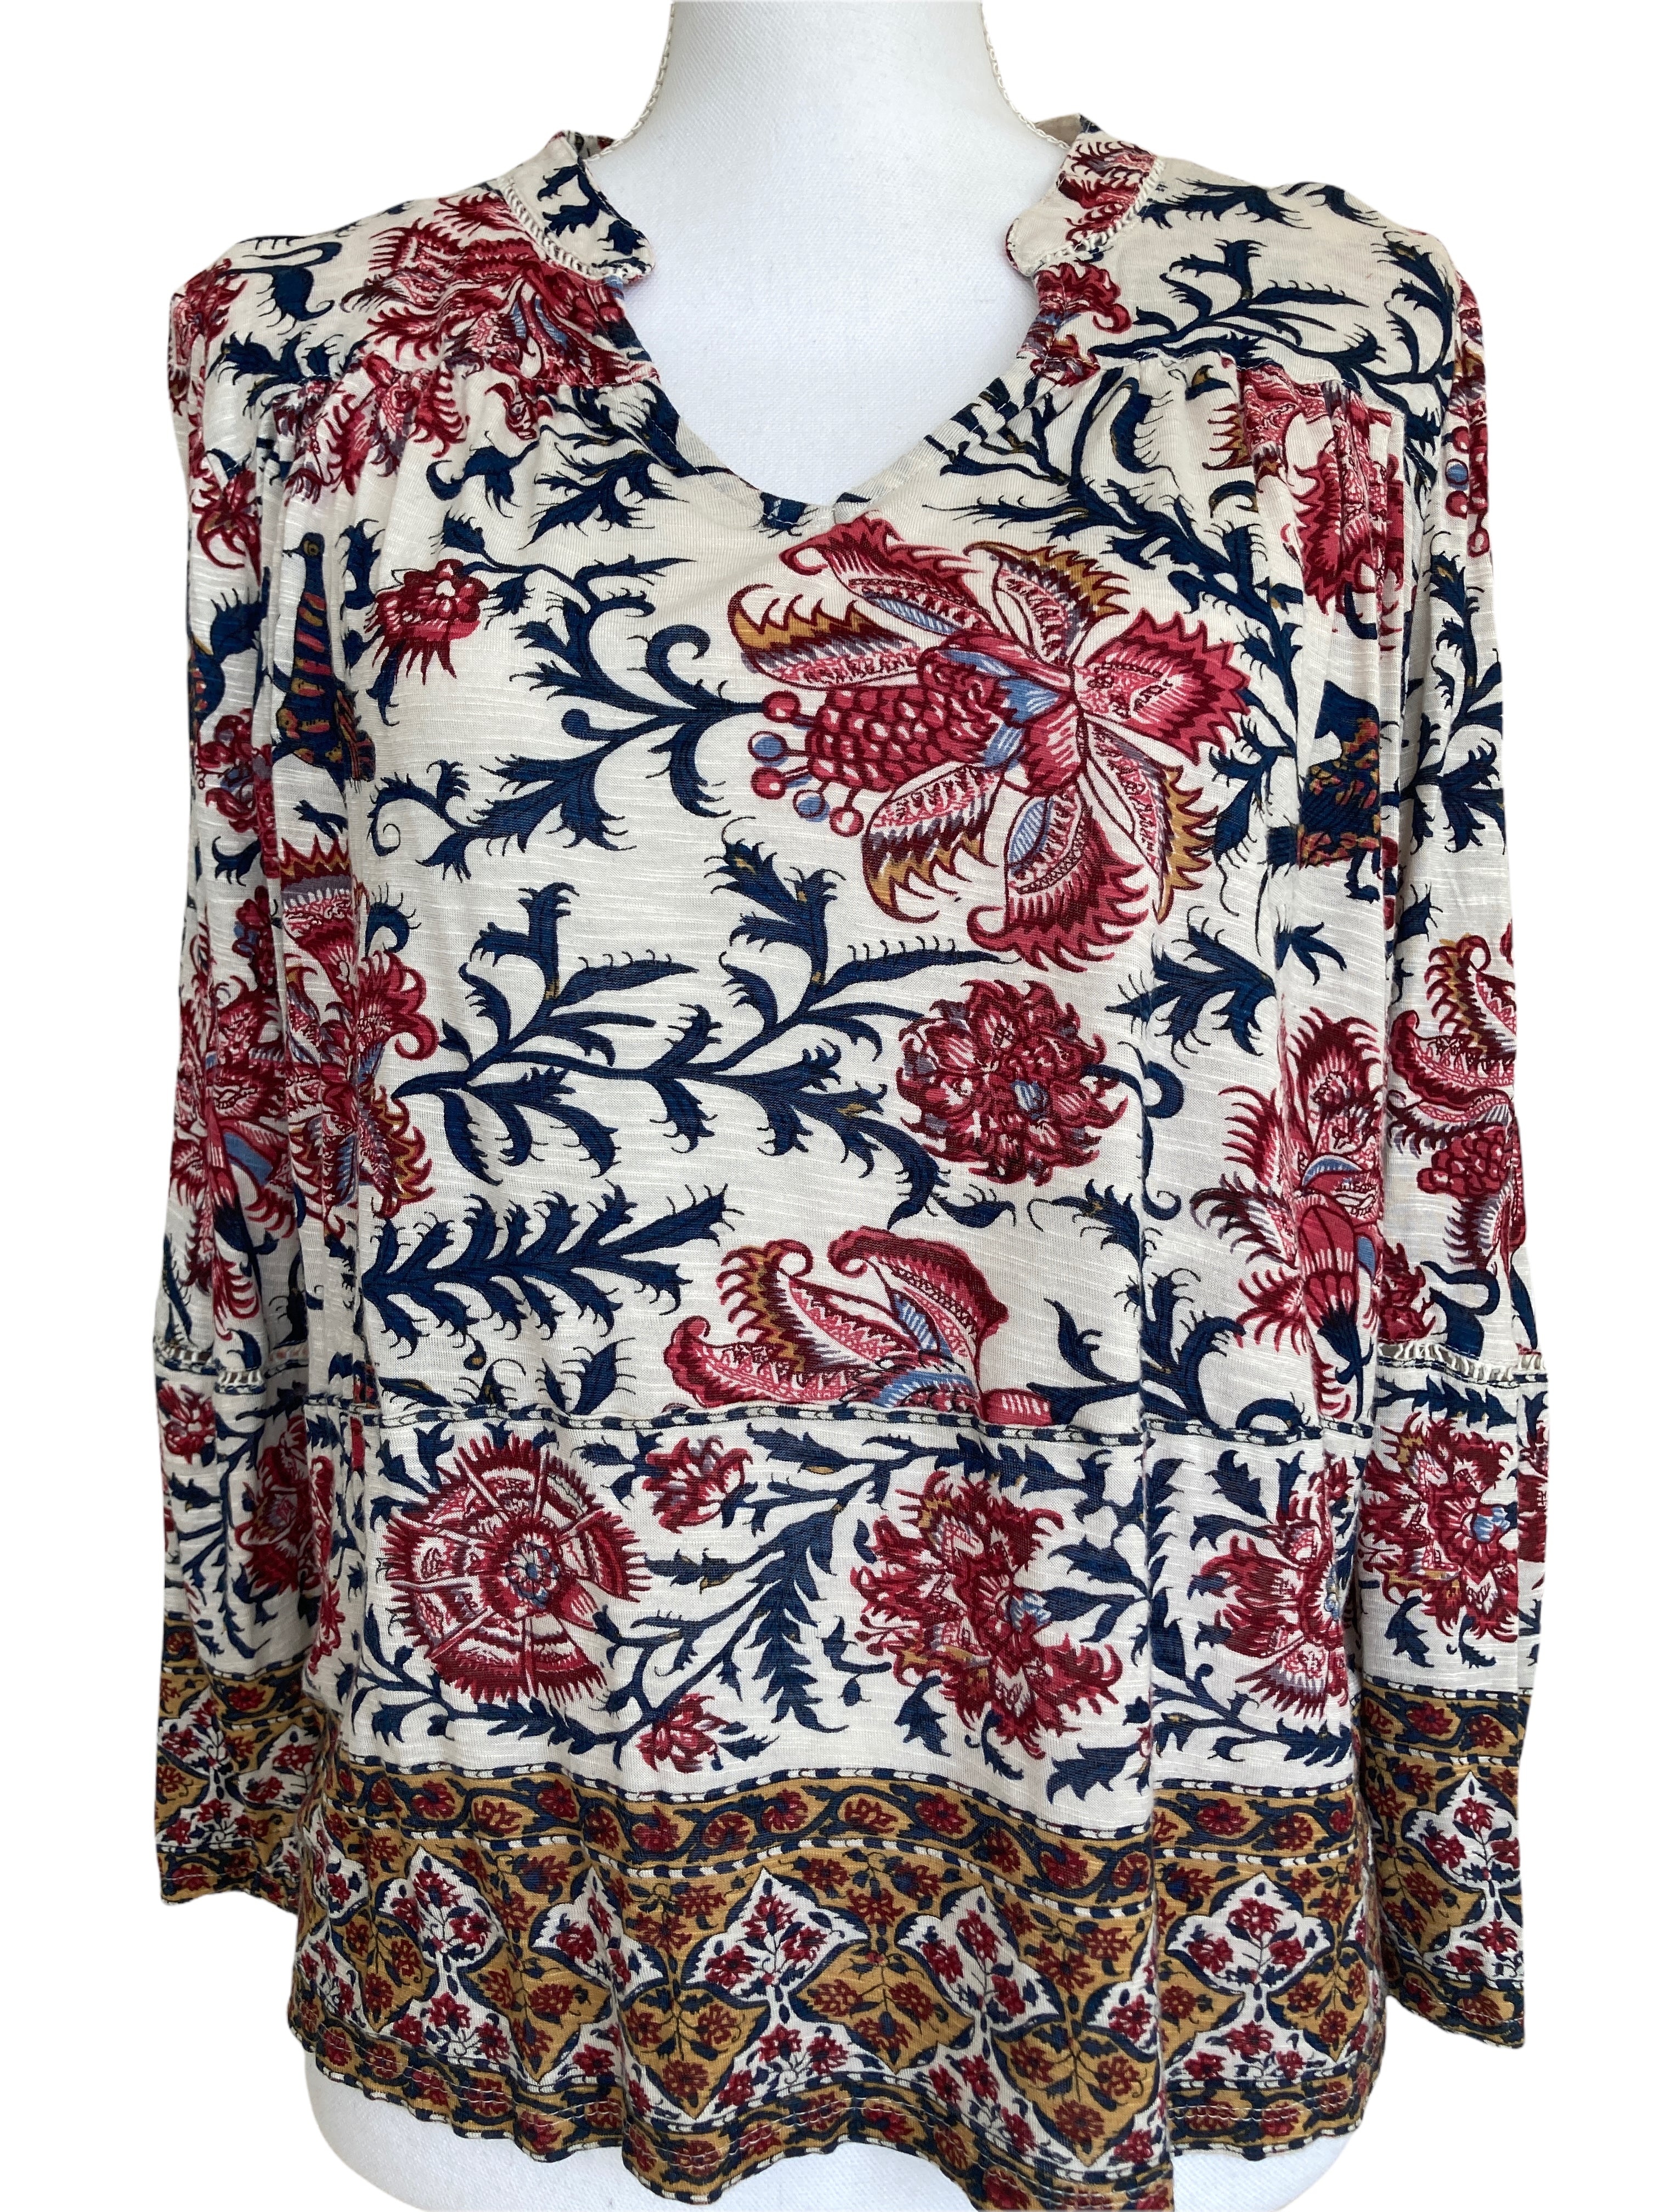 Lucky Brand Navy and Maroon Print Top, M